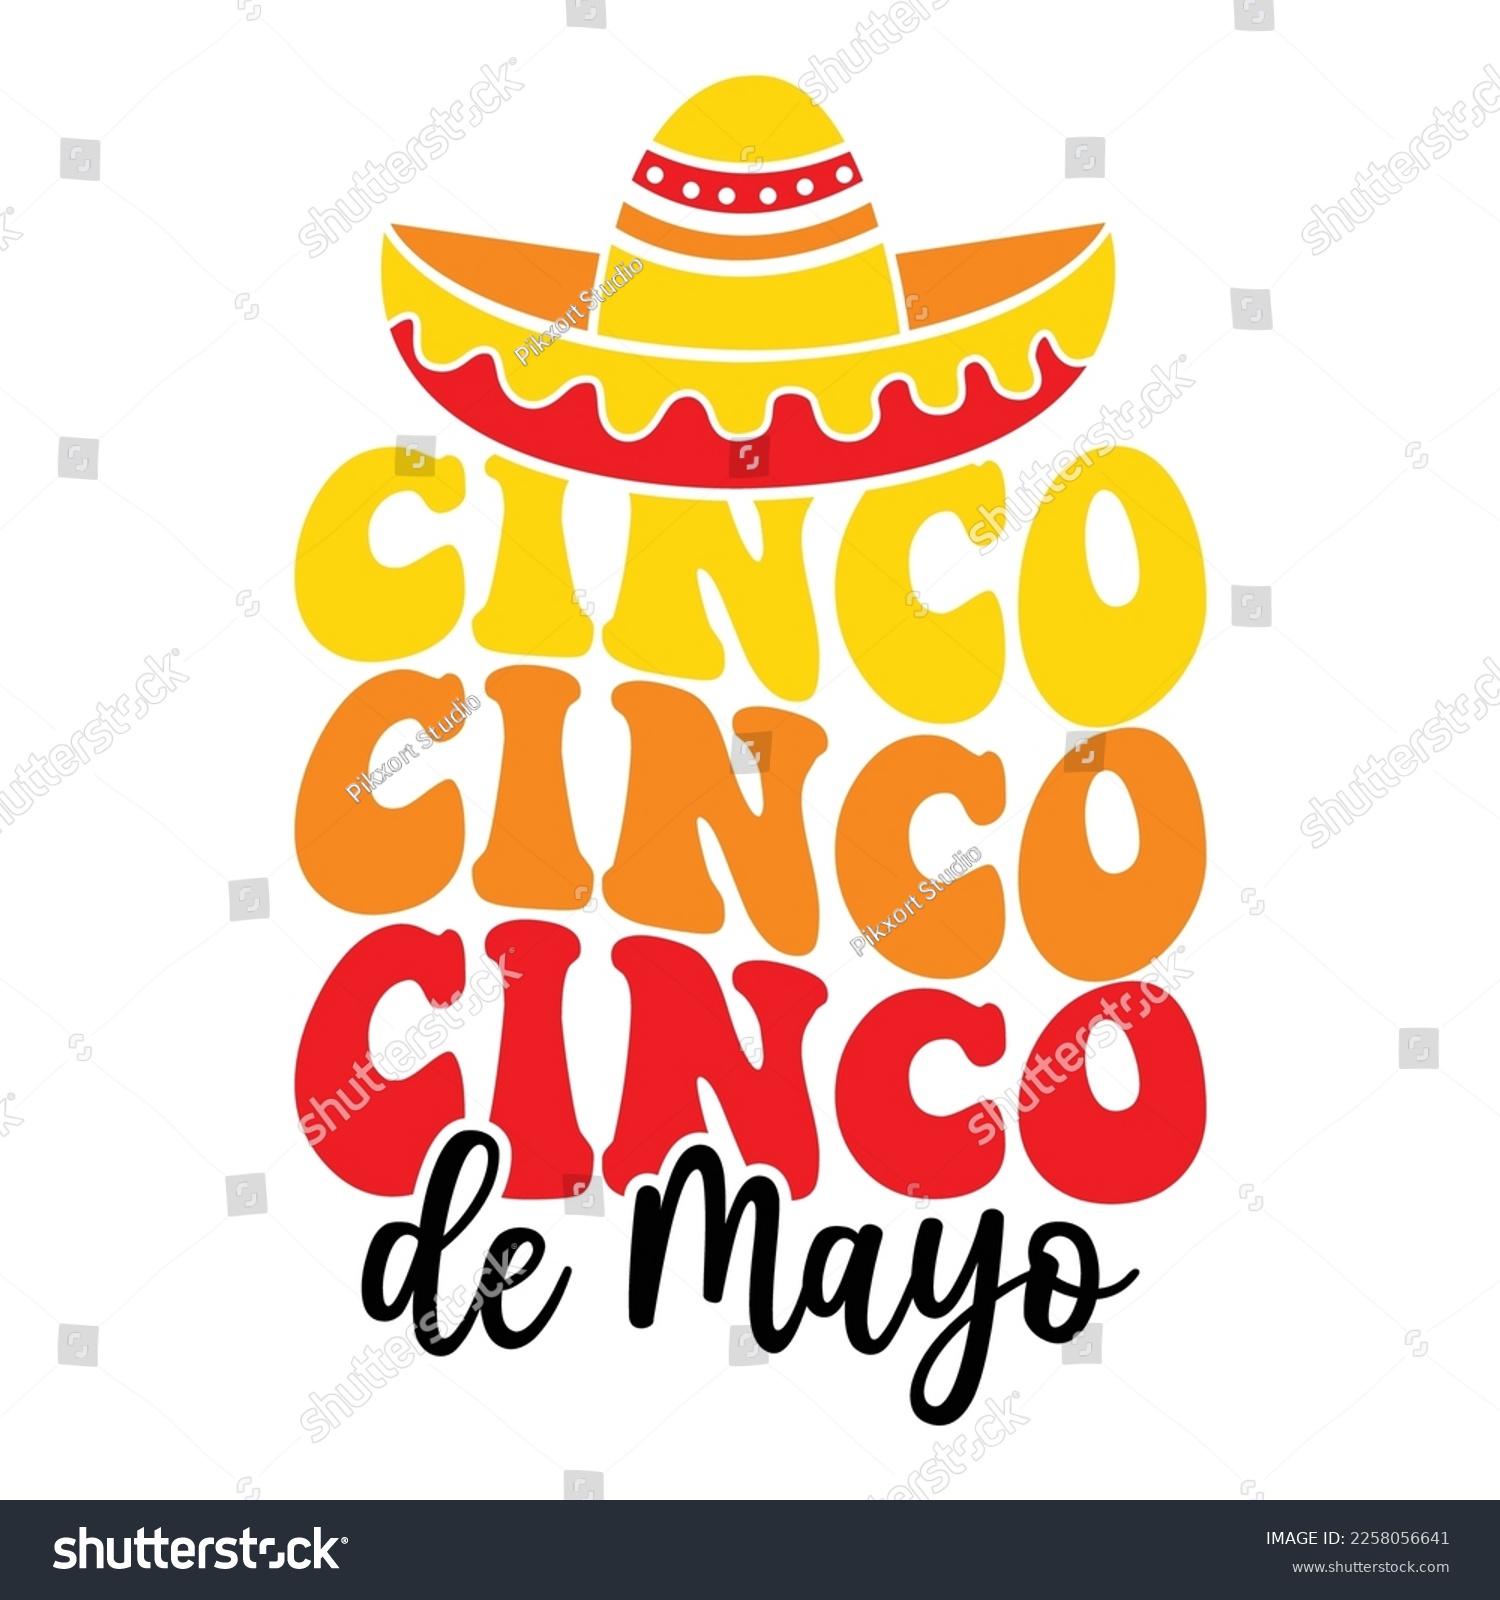 SVG of Cinco de Mayo - May 5, Federal Holiday in Mexico. Fiesta Banner And Poster Design With Flags, Flowers, Fecorations, Maracas And Sombrero svg